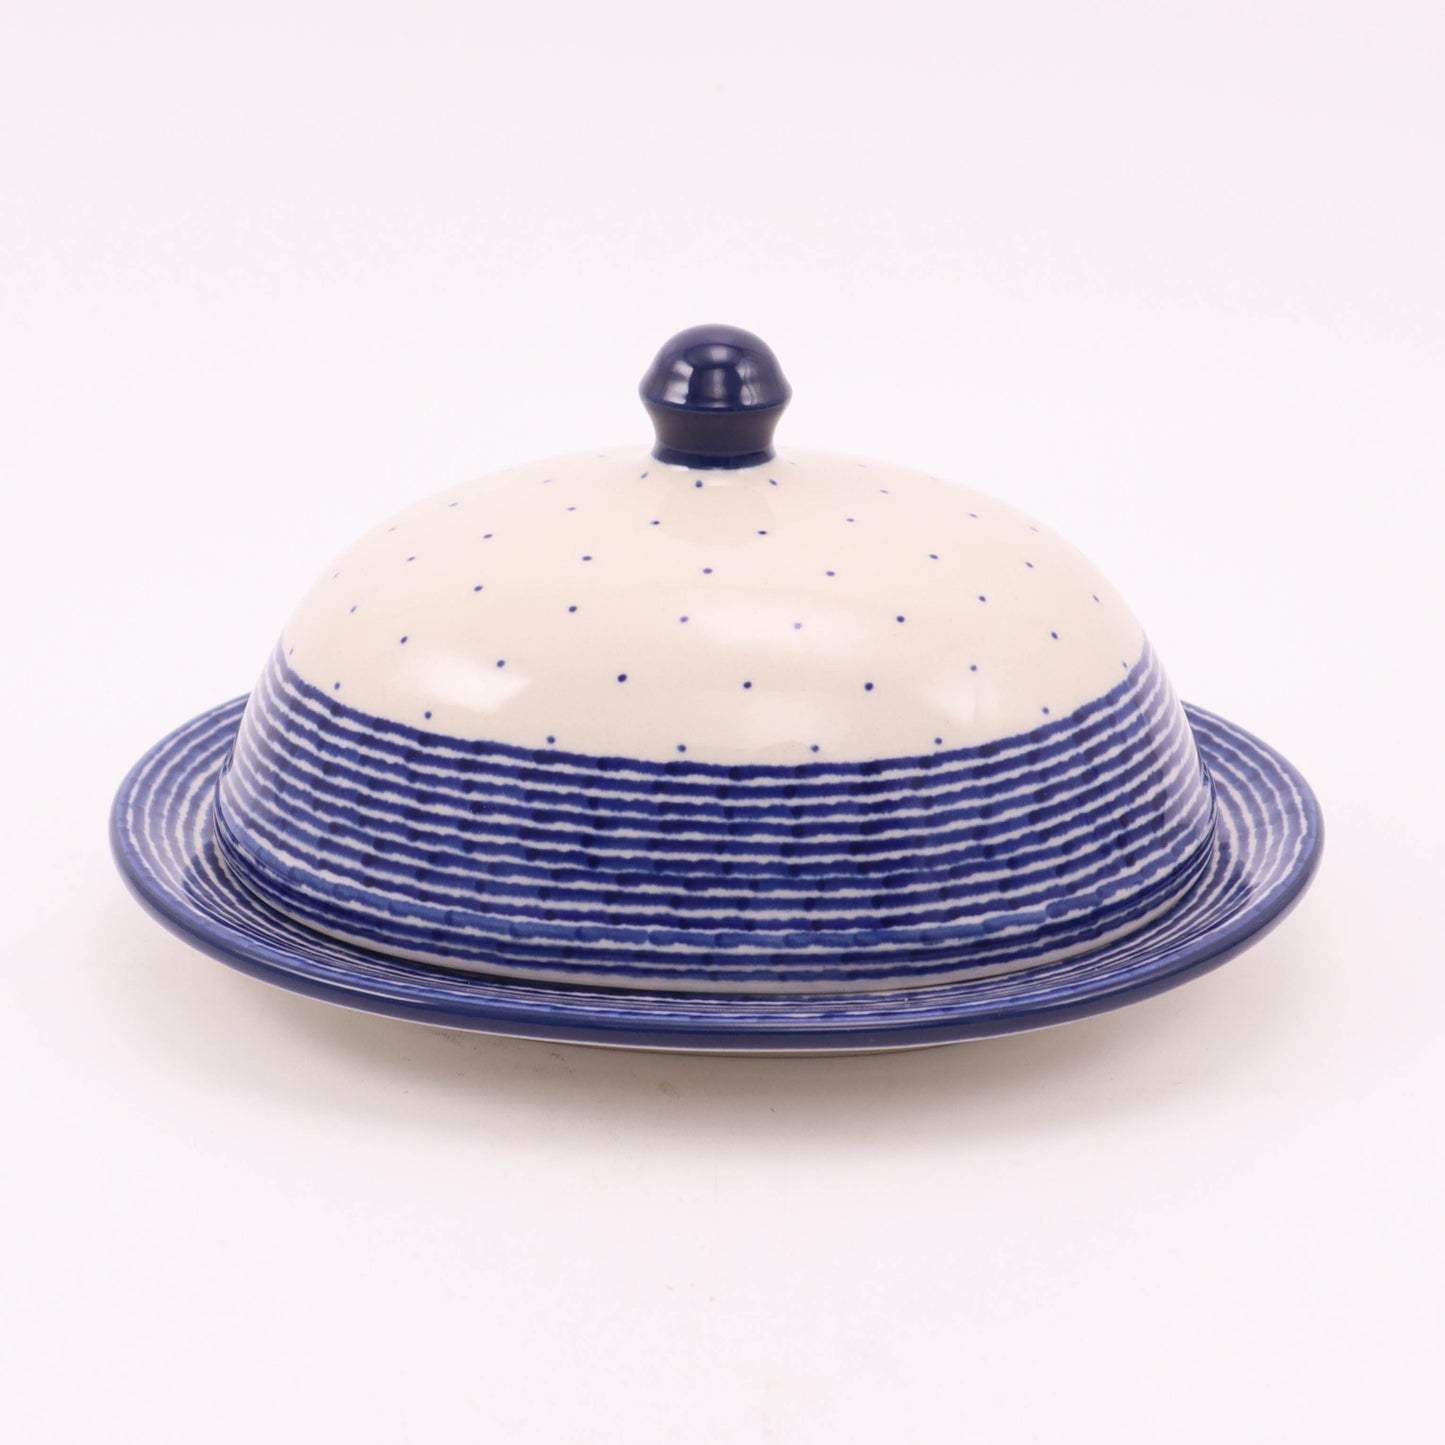 8"x7"x4" Covered Dish. Pattern: Belleview